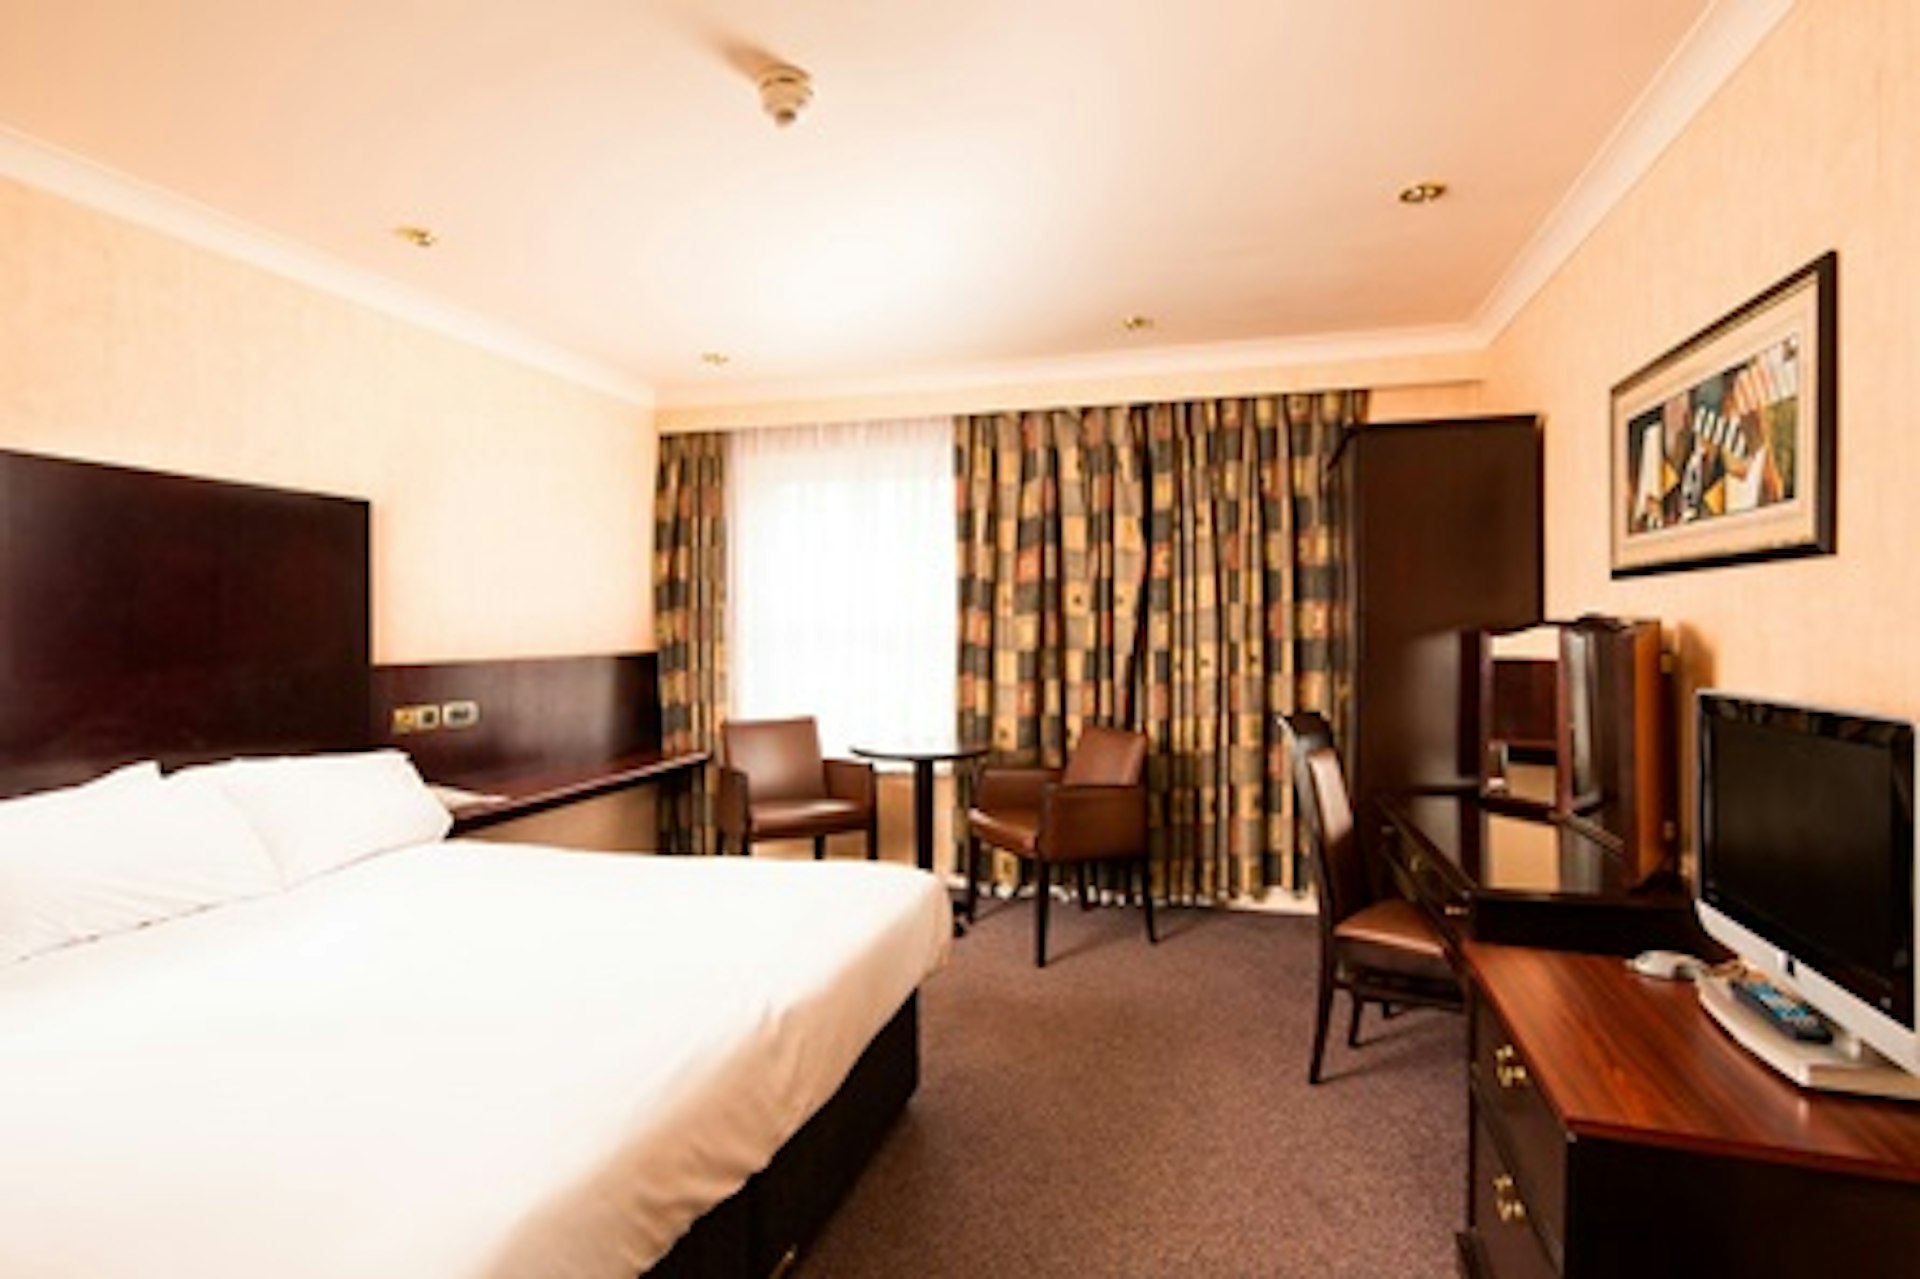 One Night Break for Two at the Mercure Bewdley The Heath Hotel 2